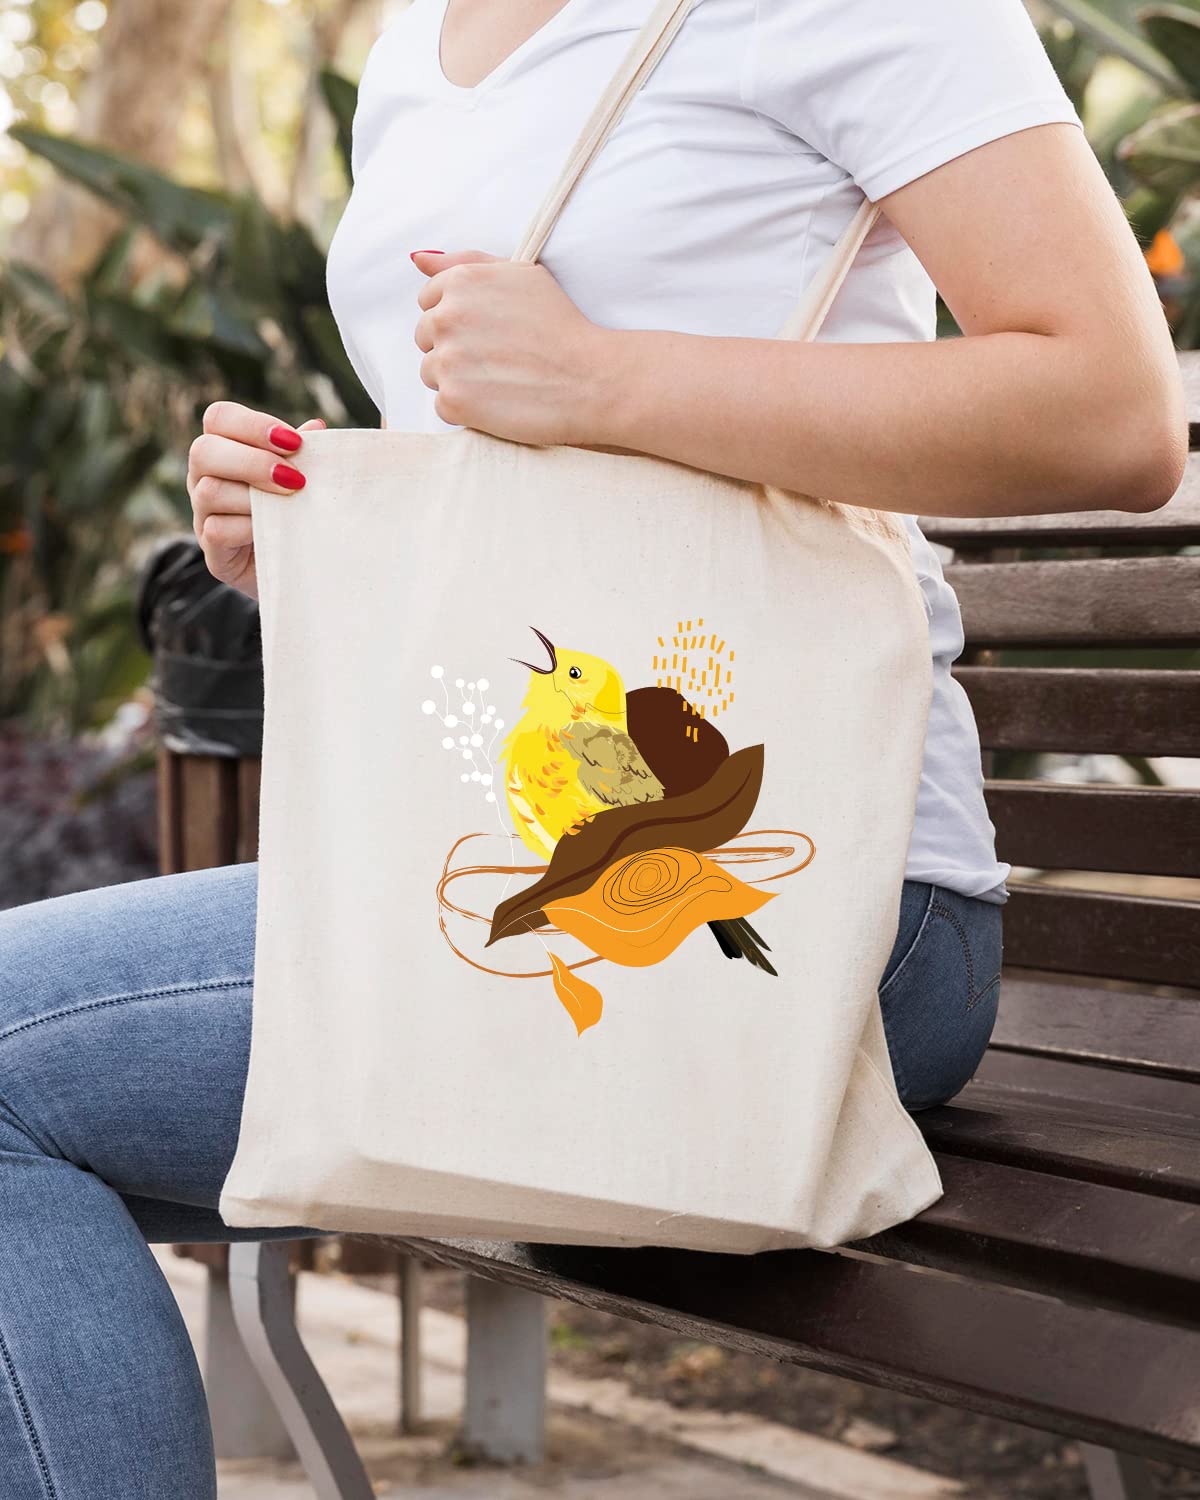 The Pink Magnet Yellow Bird Tote Bag - Canvas Tote Bag for Women | Printed Multipurpose Cotton Bags | Cute Hand Bag for Girls | Best for College, Travel, Grocery | Reusable Shopping Bag | Eco-Friendly Tote Bag